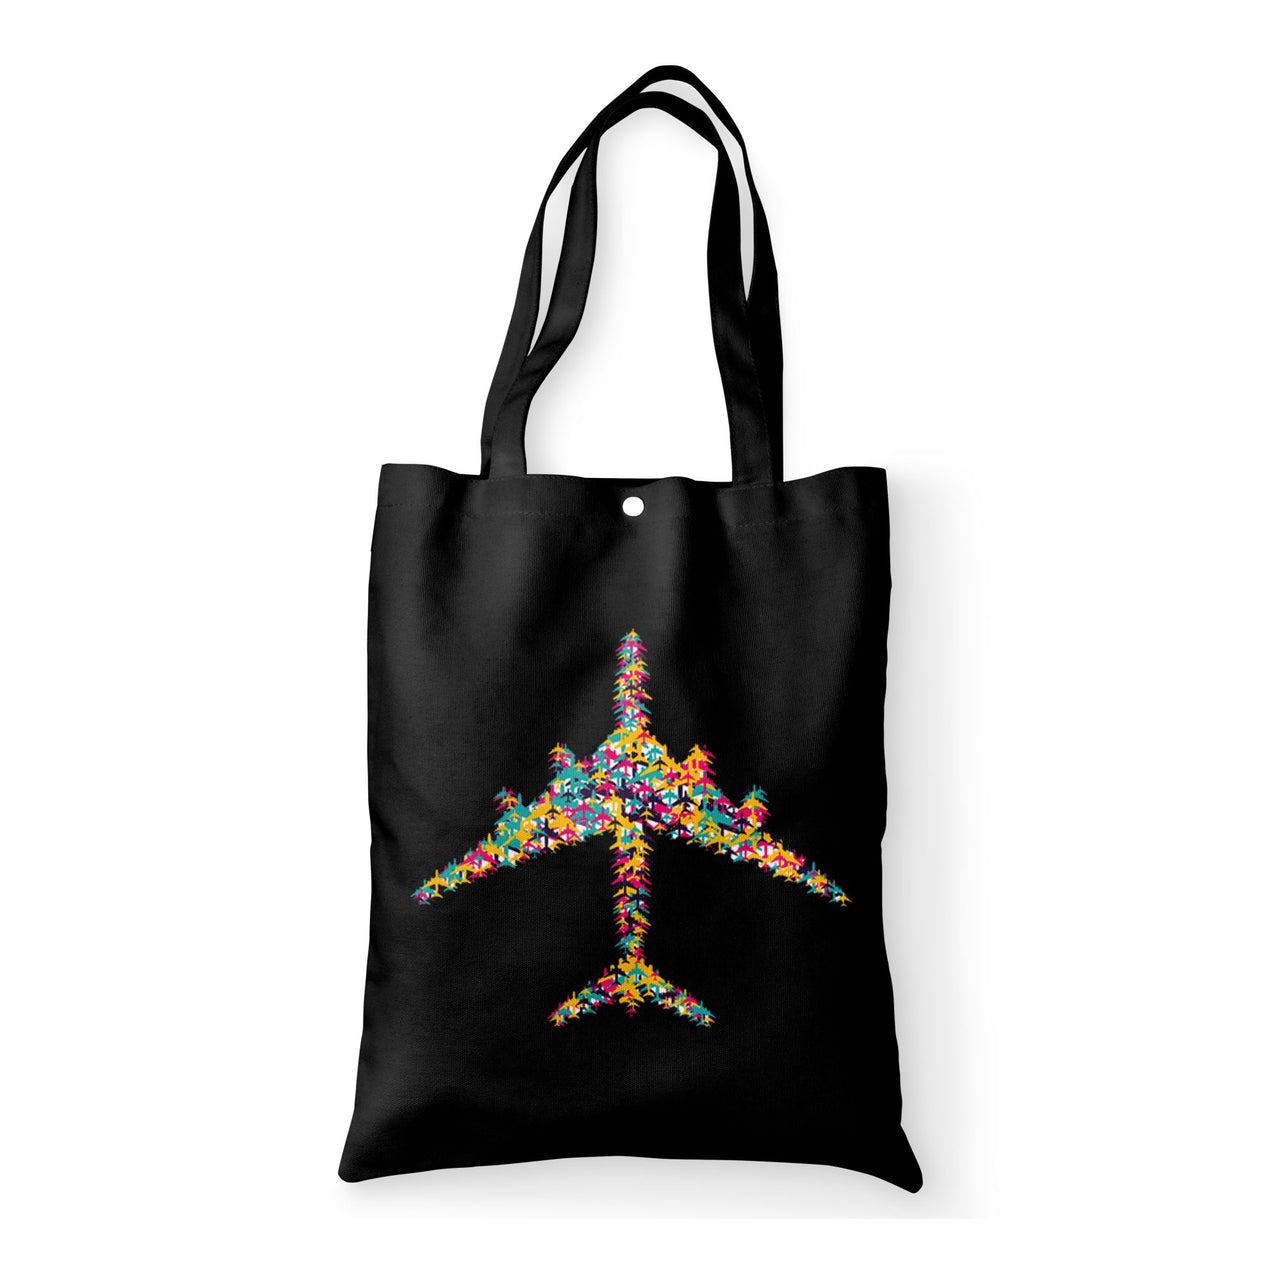 Colourful Airplane Designed Tote Bags